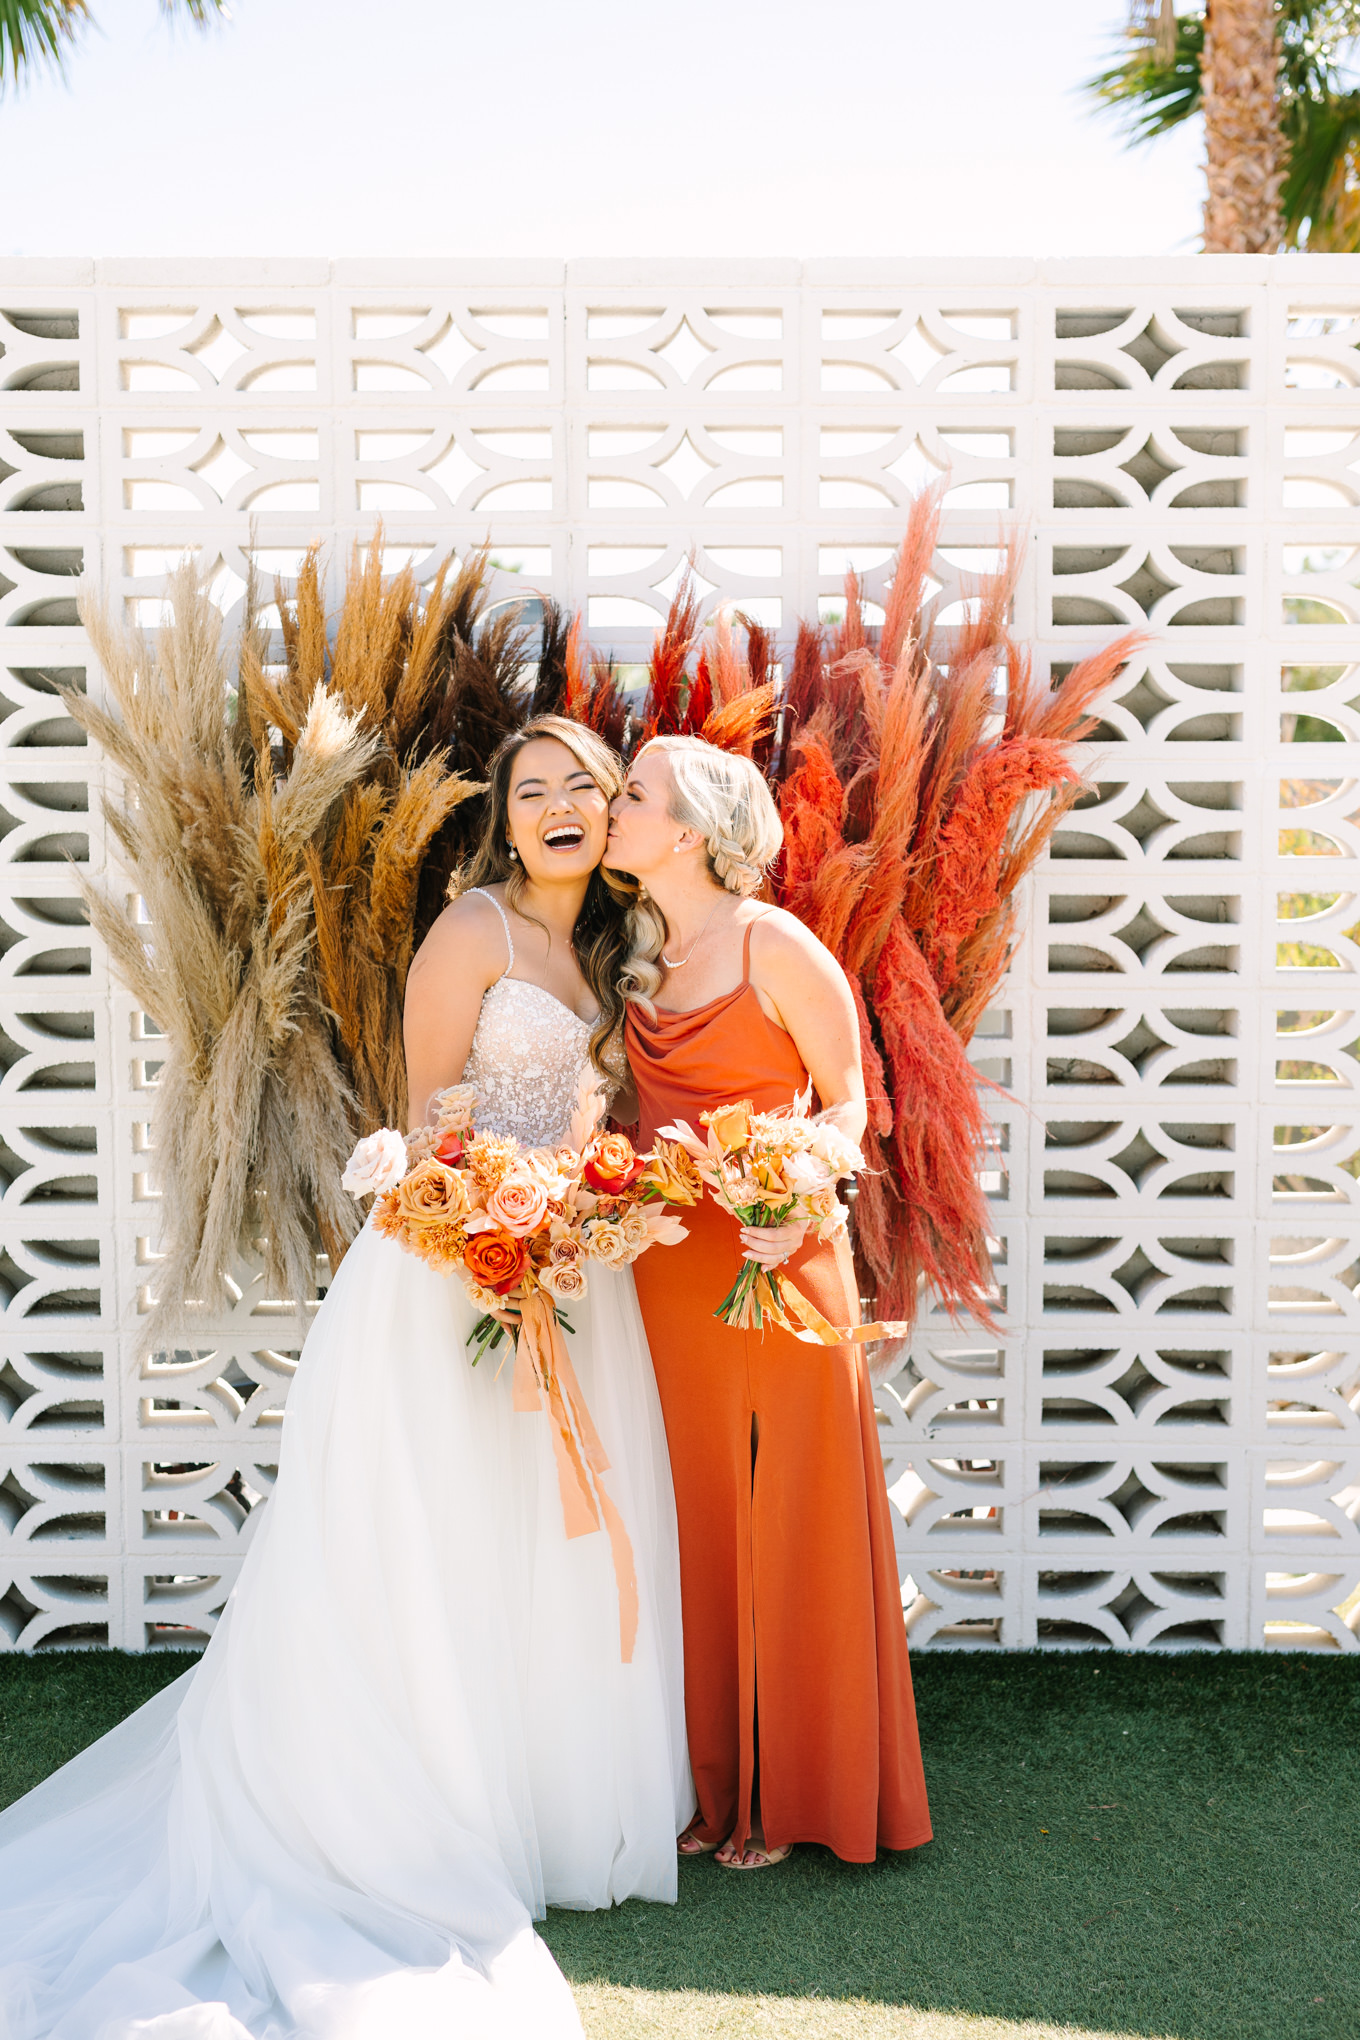 Bride with bridesmaid | Pink and orange Lautner Compound wedding | Colorful Palm Springs wedding photography | #palmspringsphotographer #palmspringswedding #lautnercompound #southerncaliforniawedding  Source: Mary Costa Photography | Los Angeles